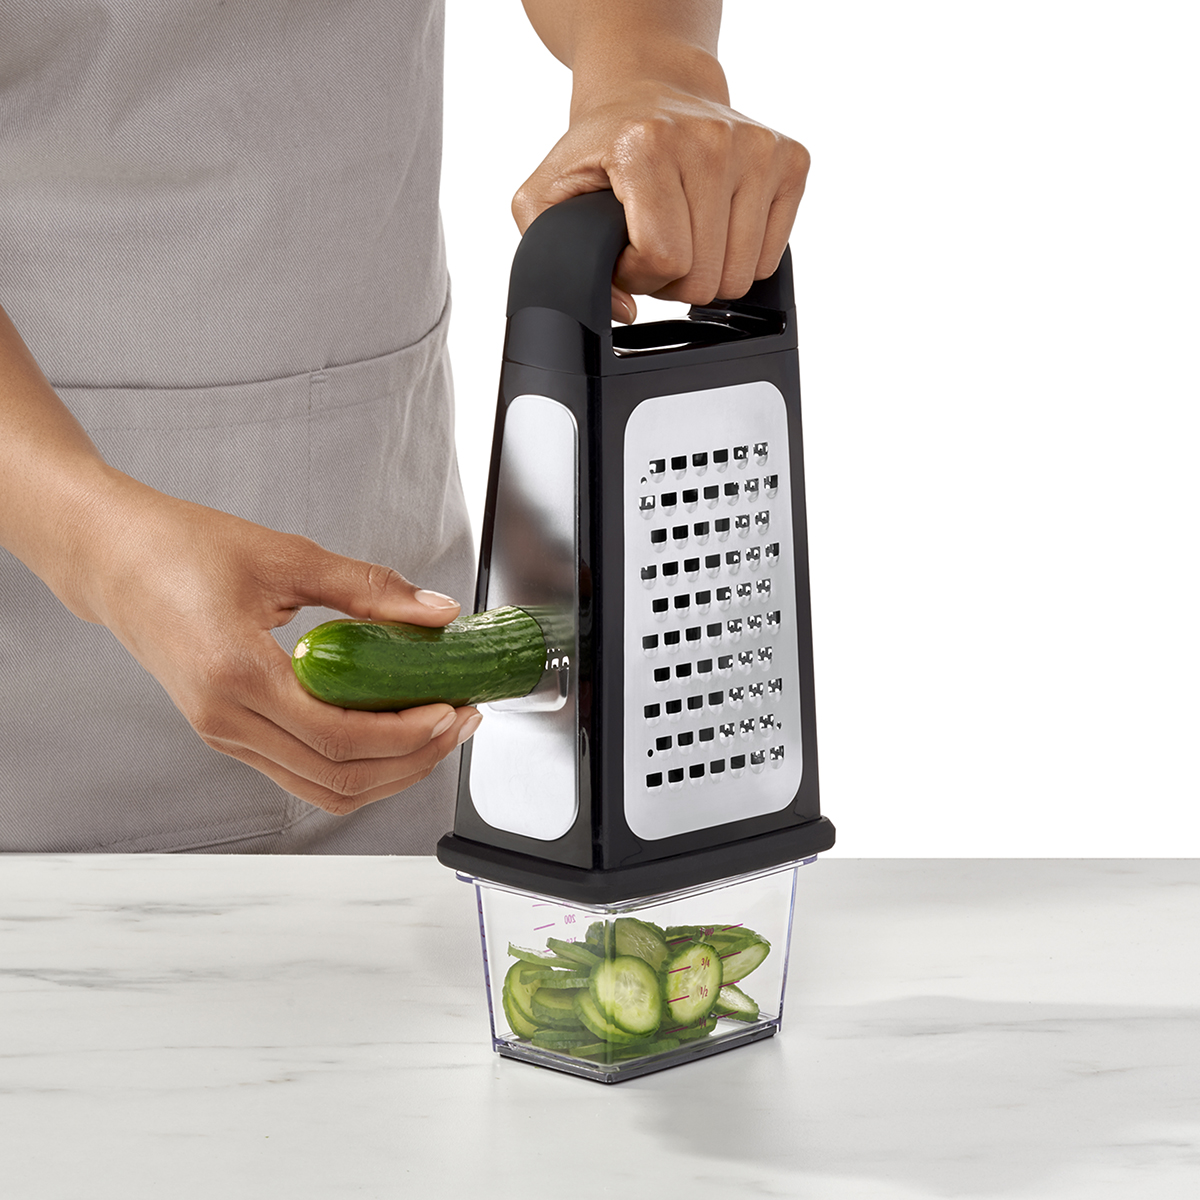 https://www.containerstore.com/catalogimages/425006/10086166-OXO-Box-Grater-VEN10.jpg